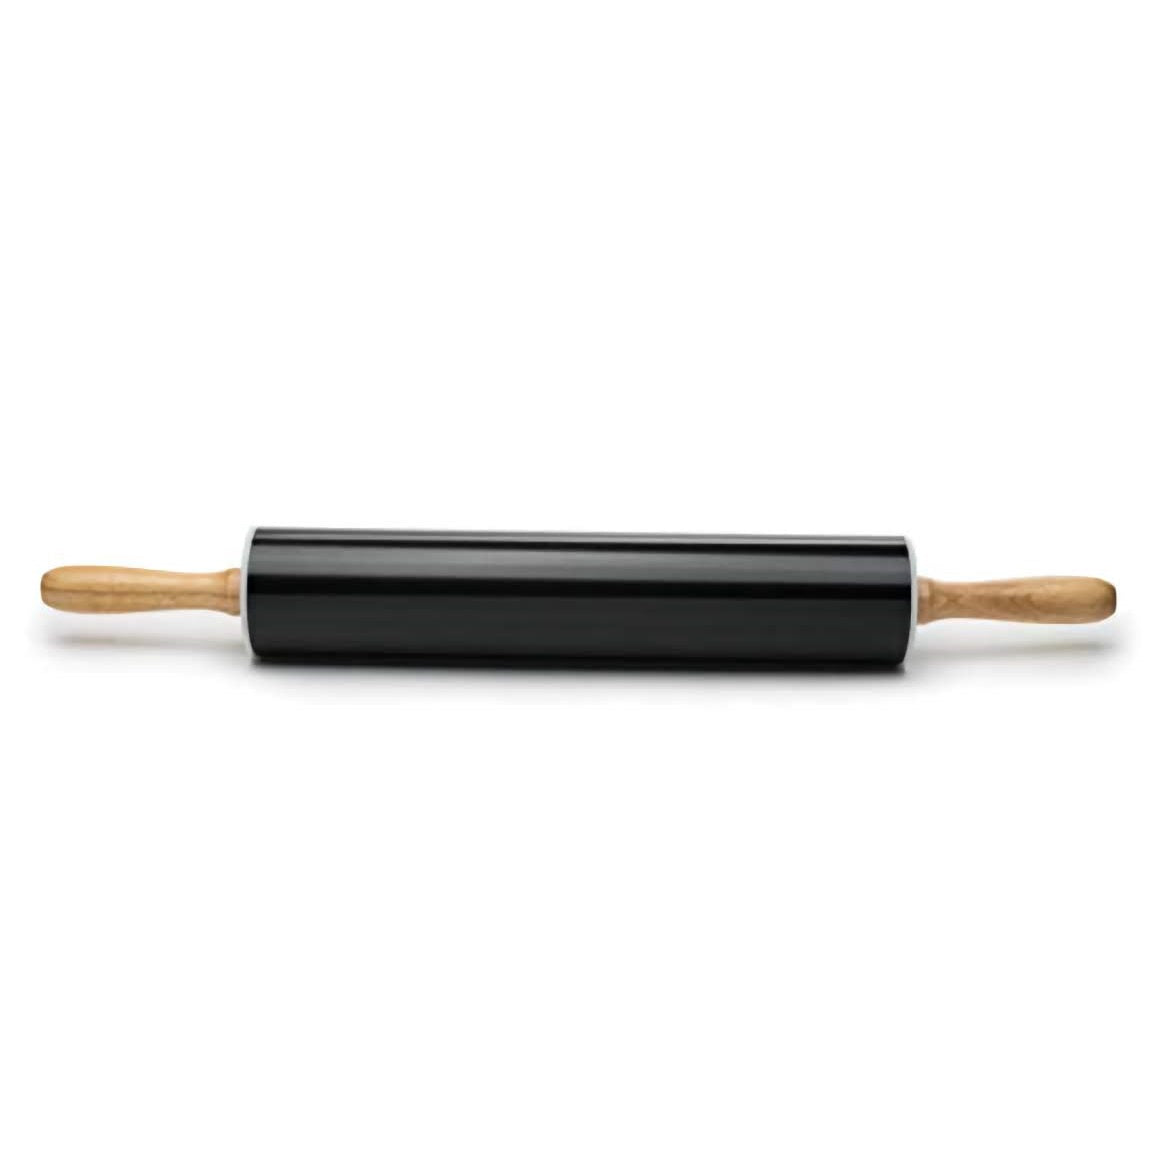 Black Carbon Rolling Pin with wooden handles on a White Background